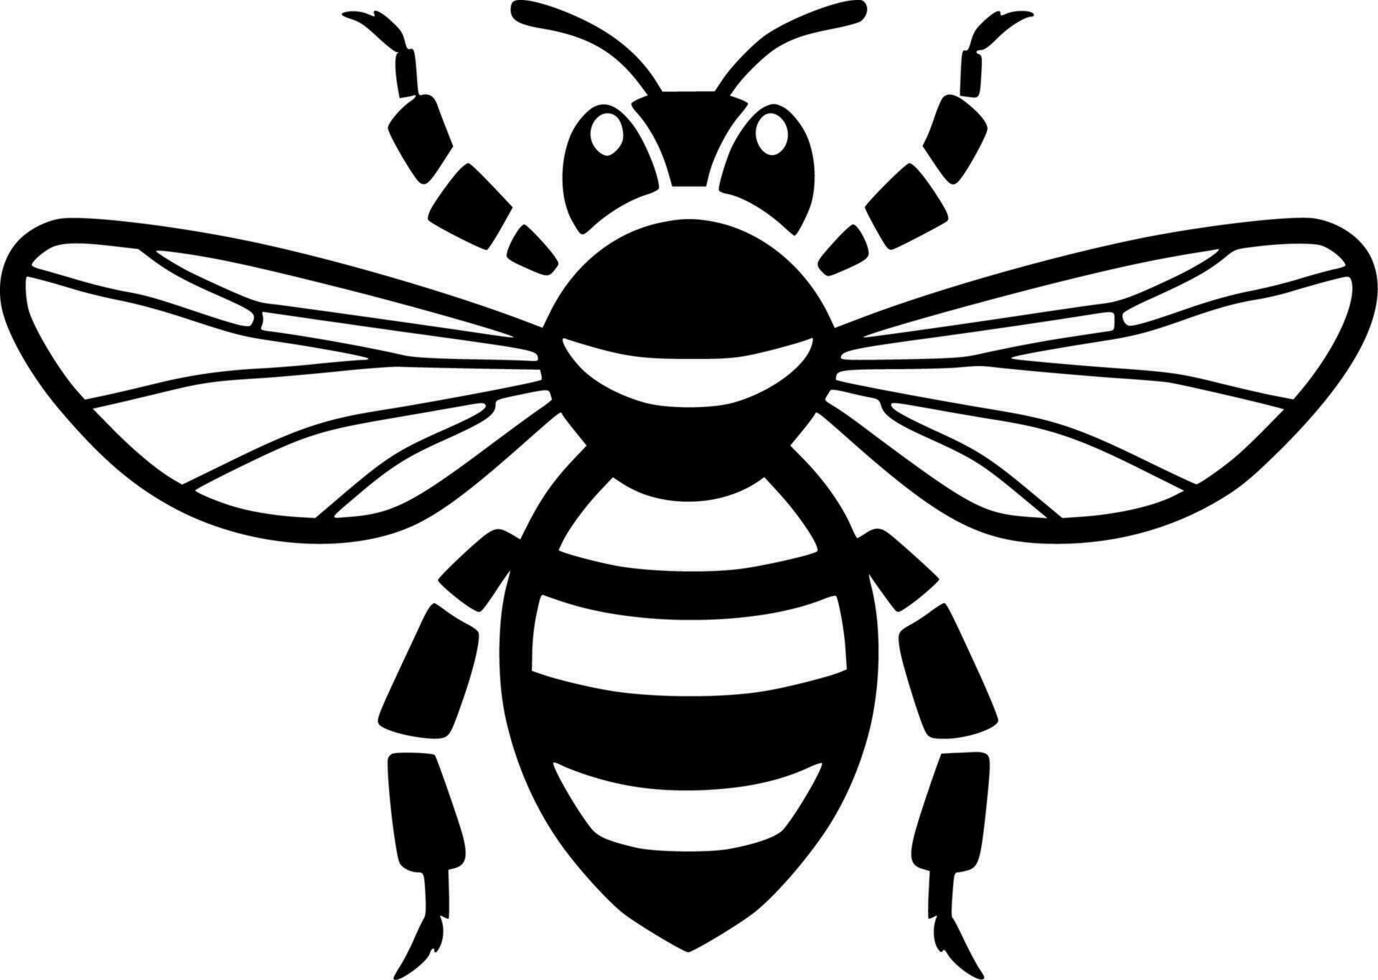 Bees - High Quality Vector Logo - Vector illustration ideal for T-shirt graphic